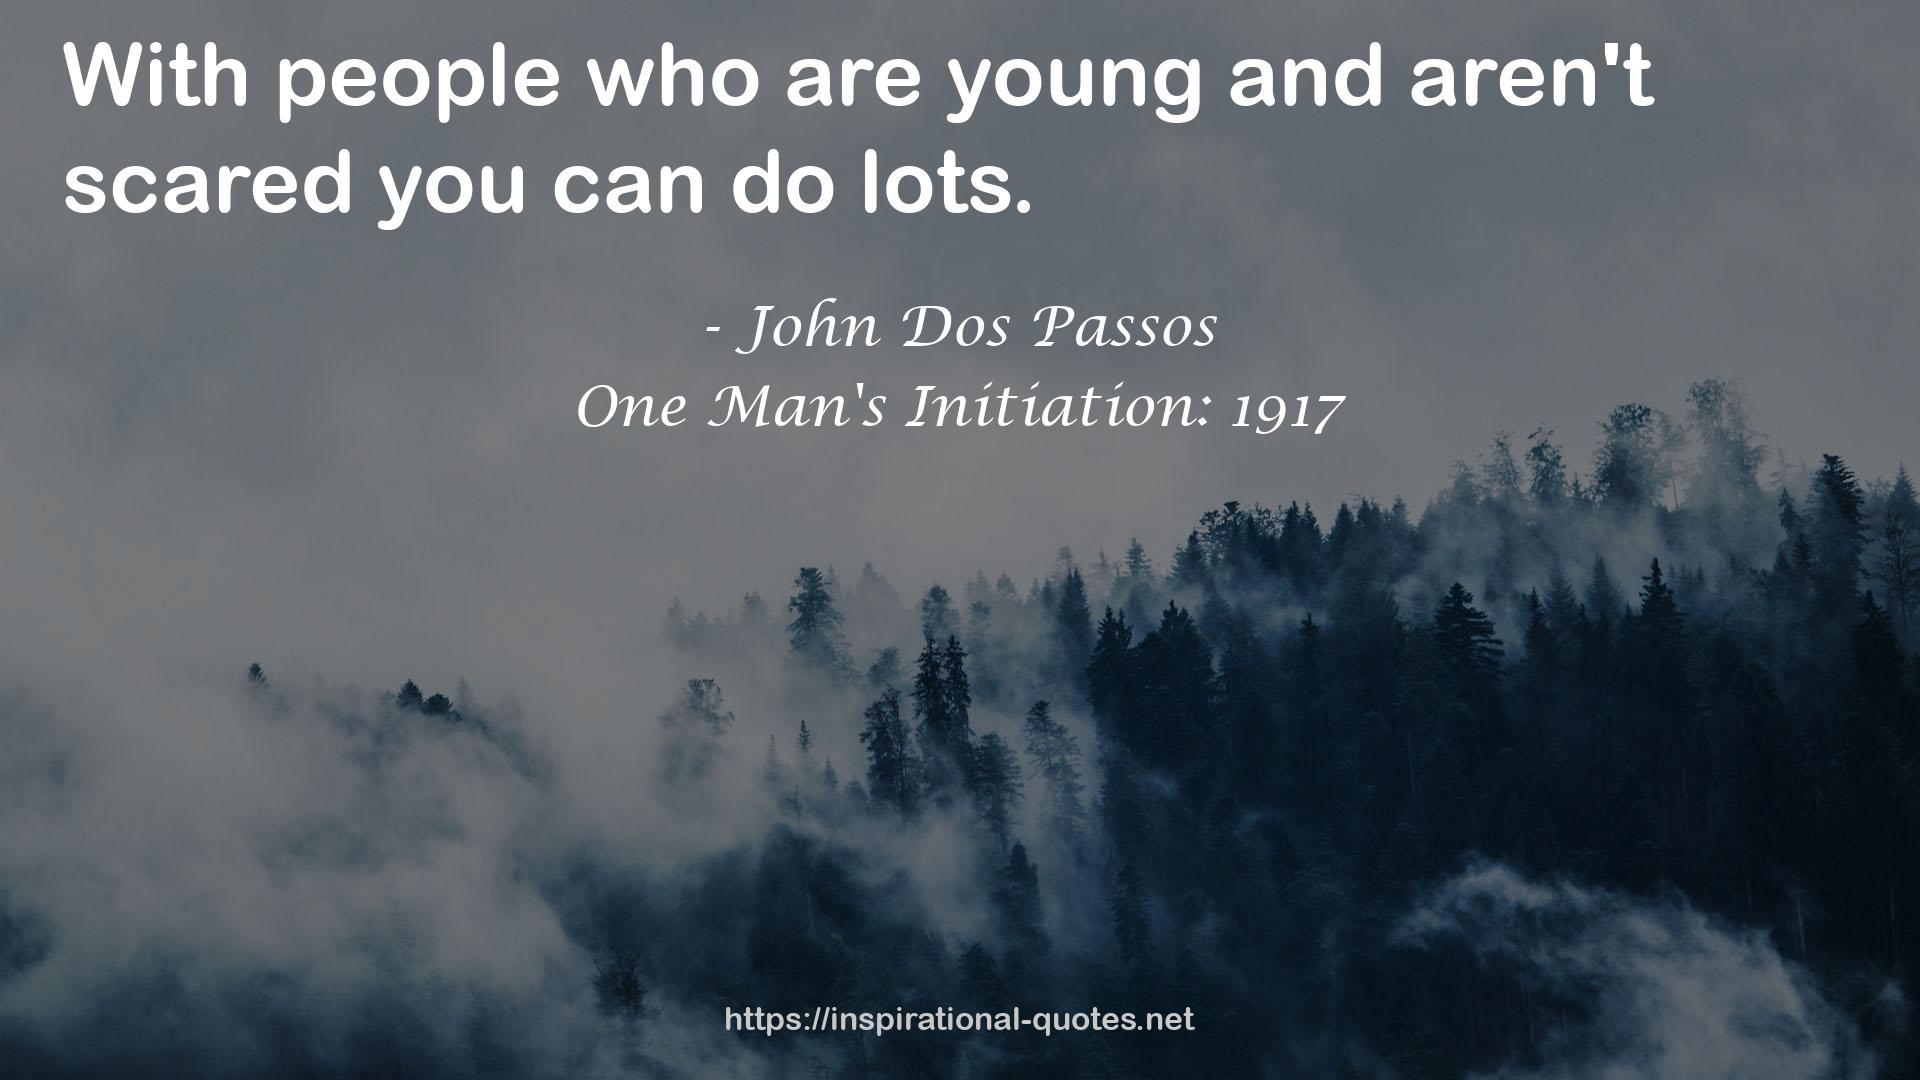 One Man's Initiation: 1917 QUOTES